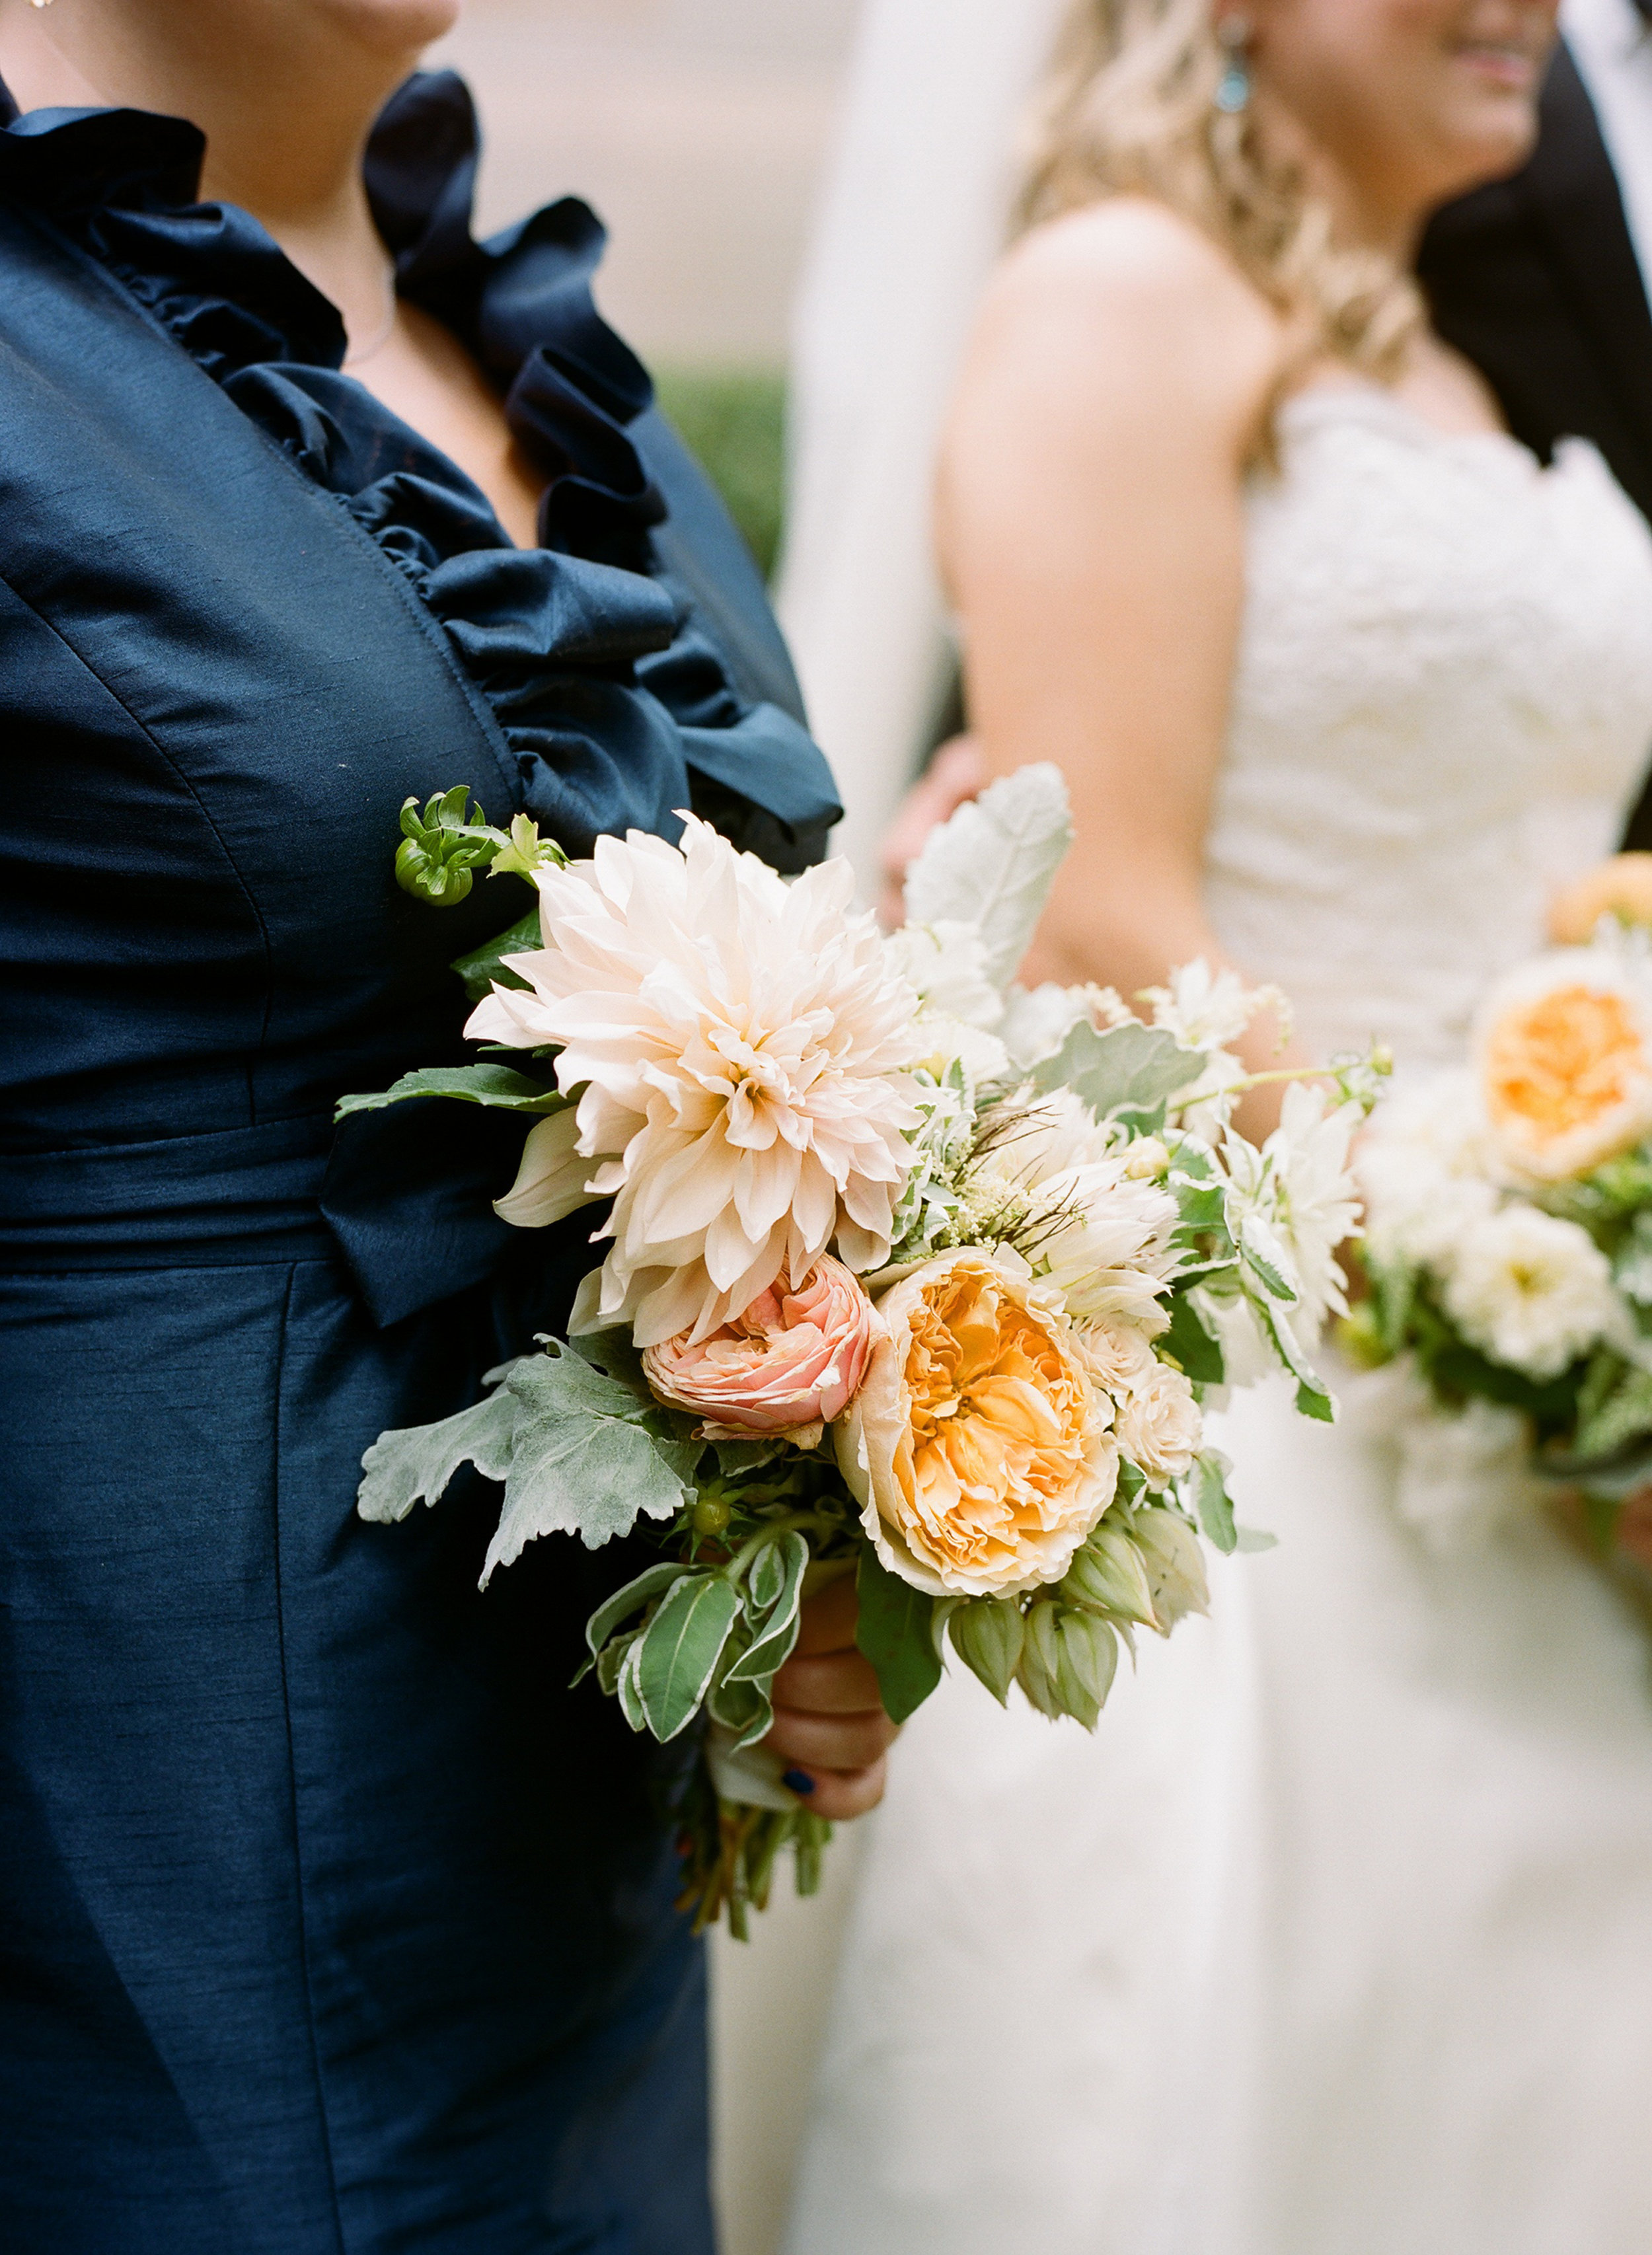 Peach, Blush, and White Floral Bouquets | Simply Charming Socials | Atlanta Wedding Planner